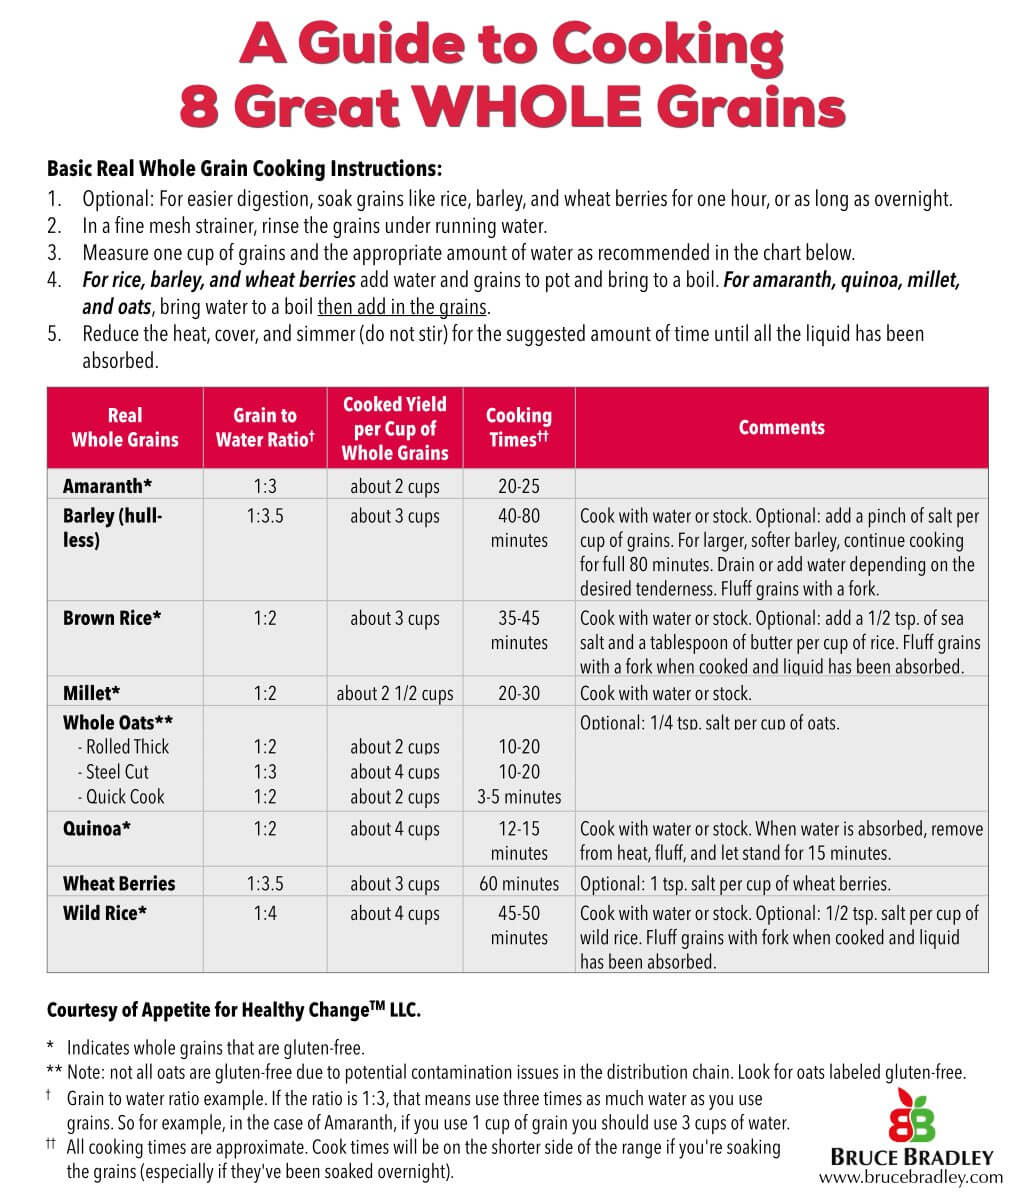 Learn How To Cook 8 Great Whole Grains.